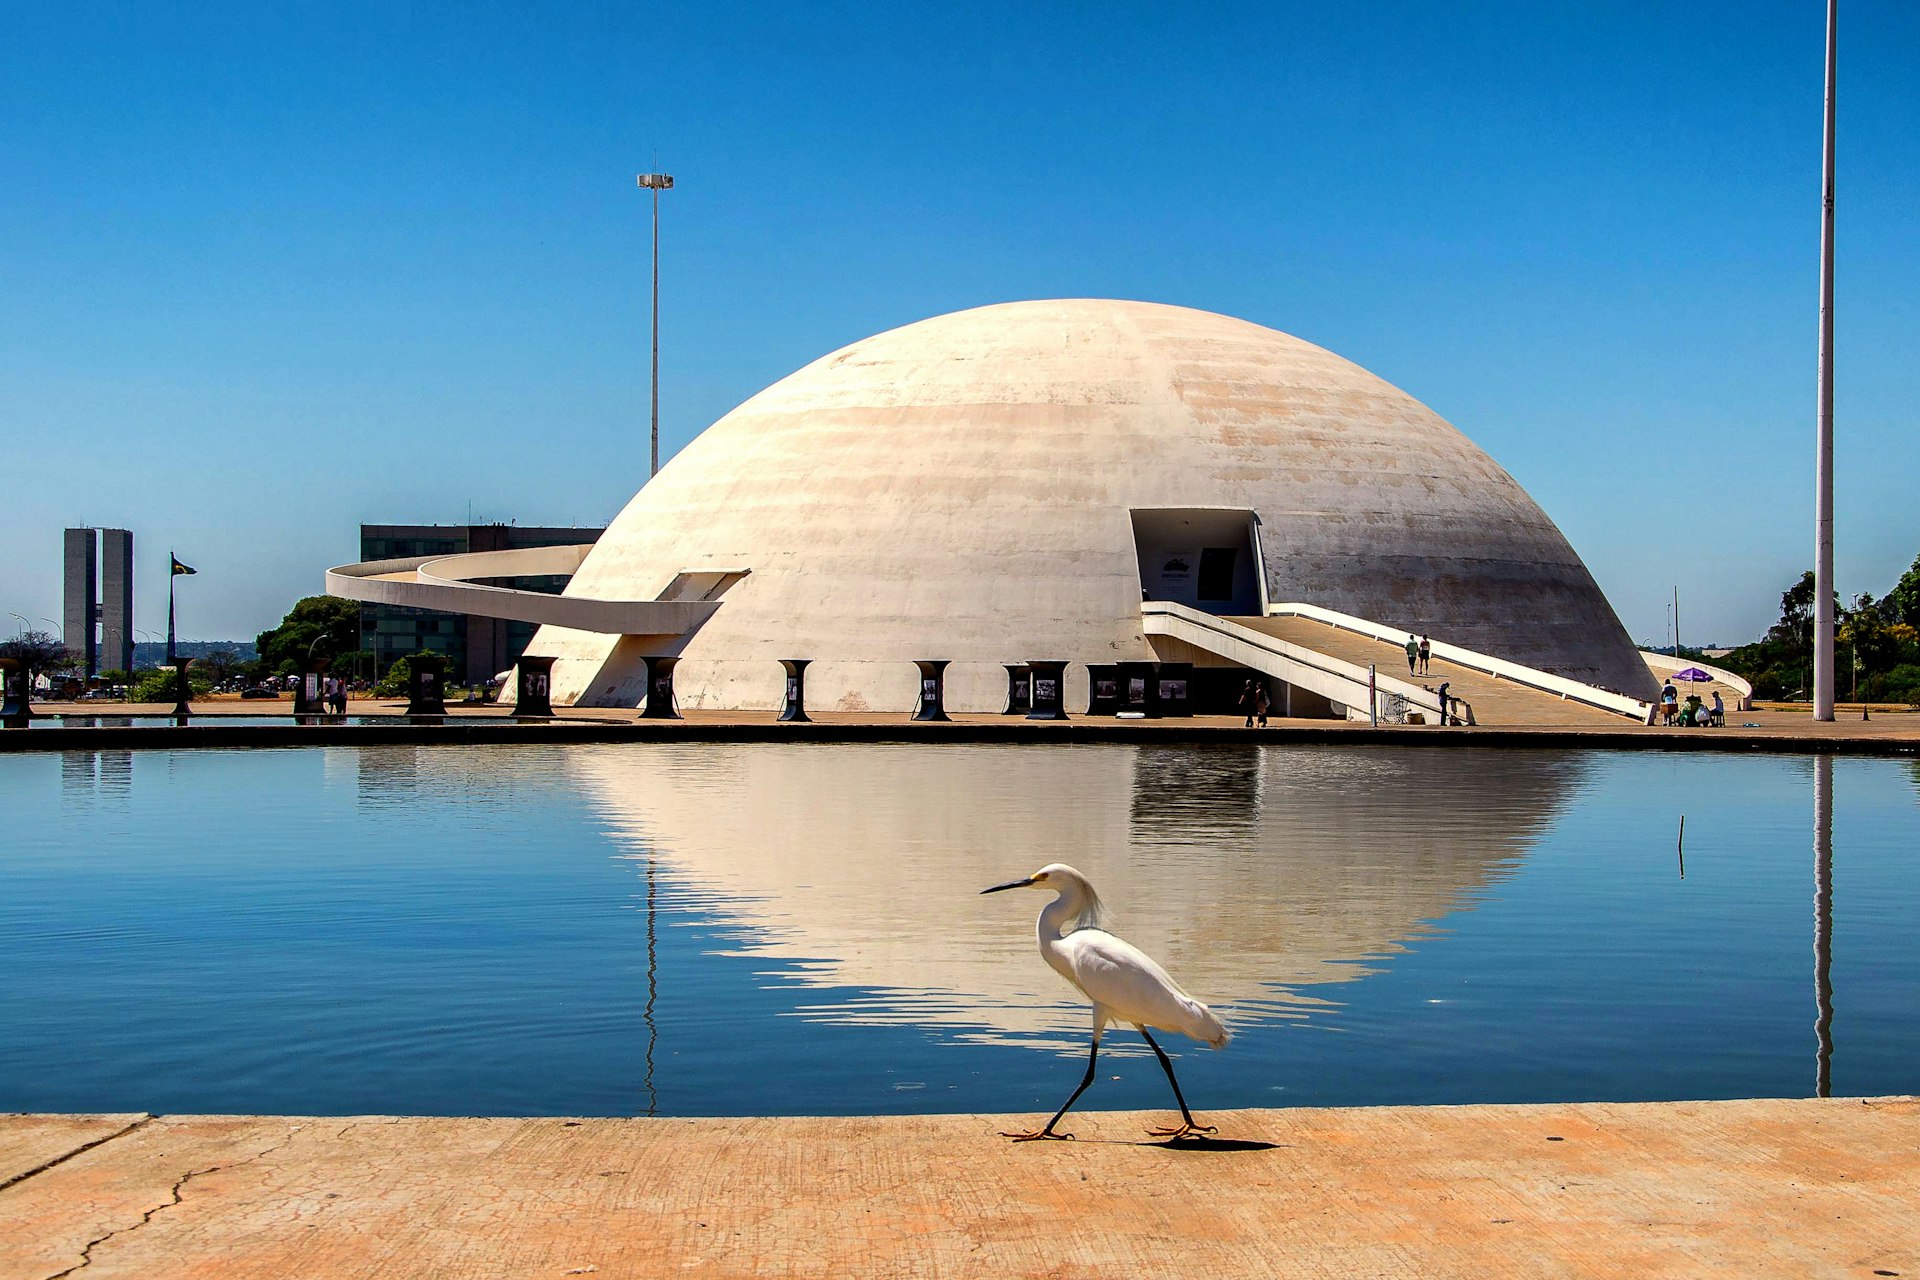 A bird walks in front of the concrete dome housing the Honestino Guimarães National Museum in Brasilia